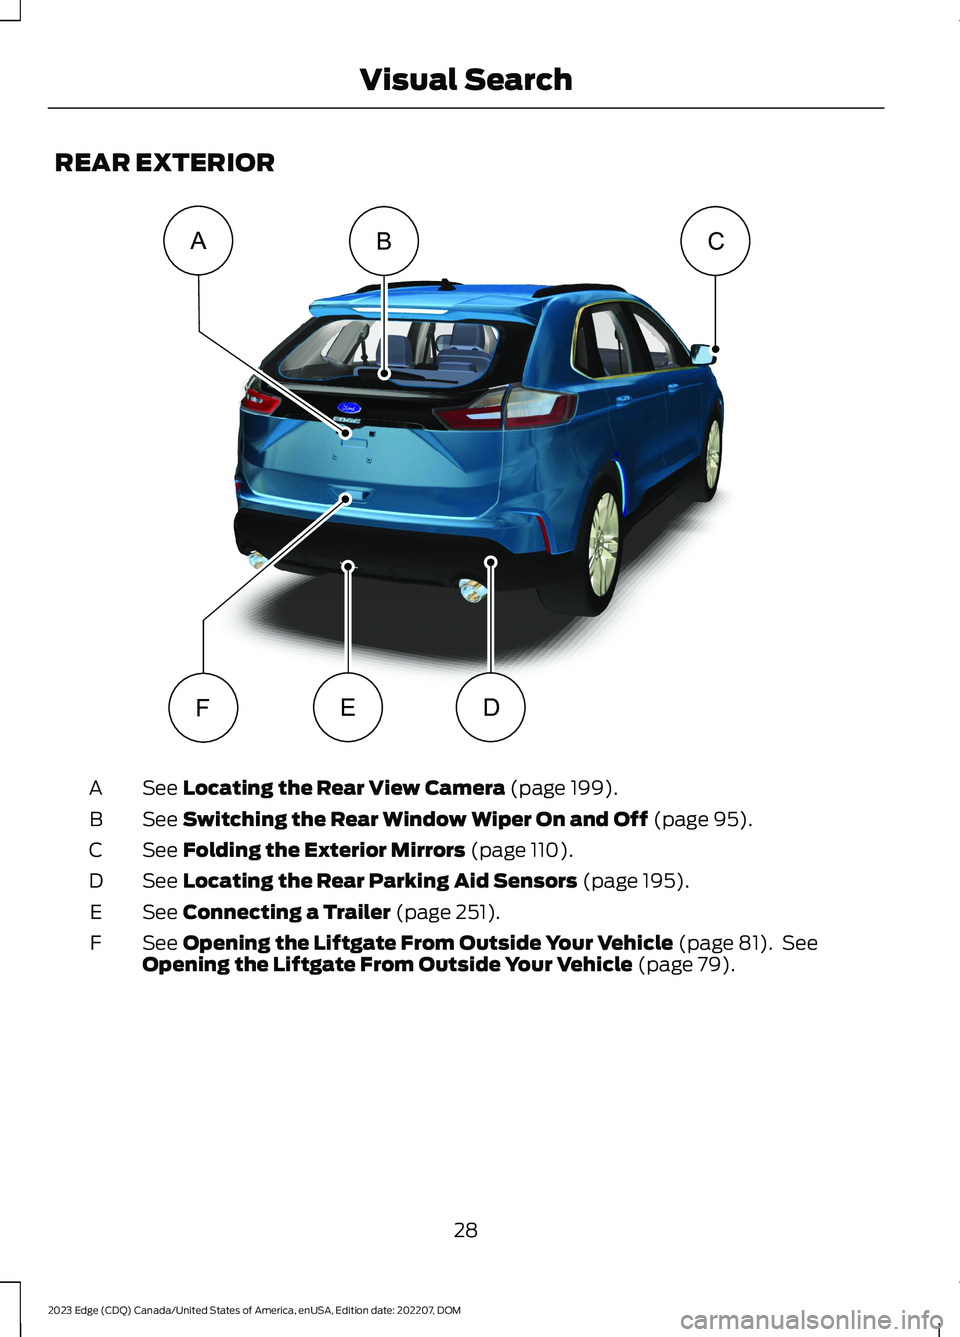 FORD EDGE 2023  Owners Manual REAR EXTERIOR
See Locating the Rear View Camera (page 199).A
See Switching the Rear Window Wiper On and Off (page 95).B
See Folding the Exterior Mirrors (page 110).C
See Locating the Rear Parking Aid 